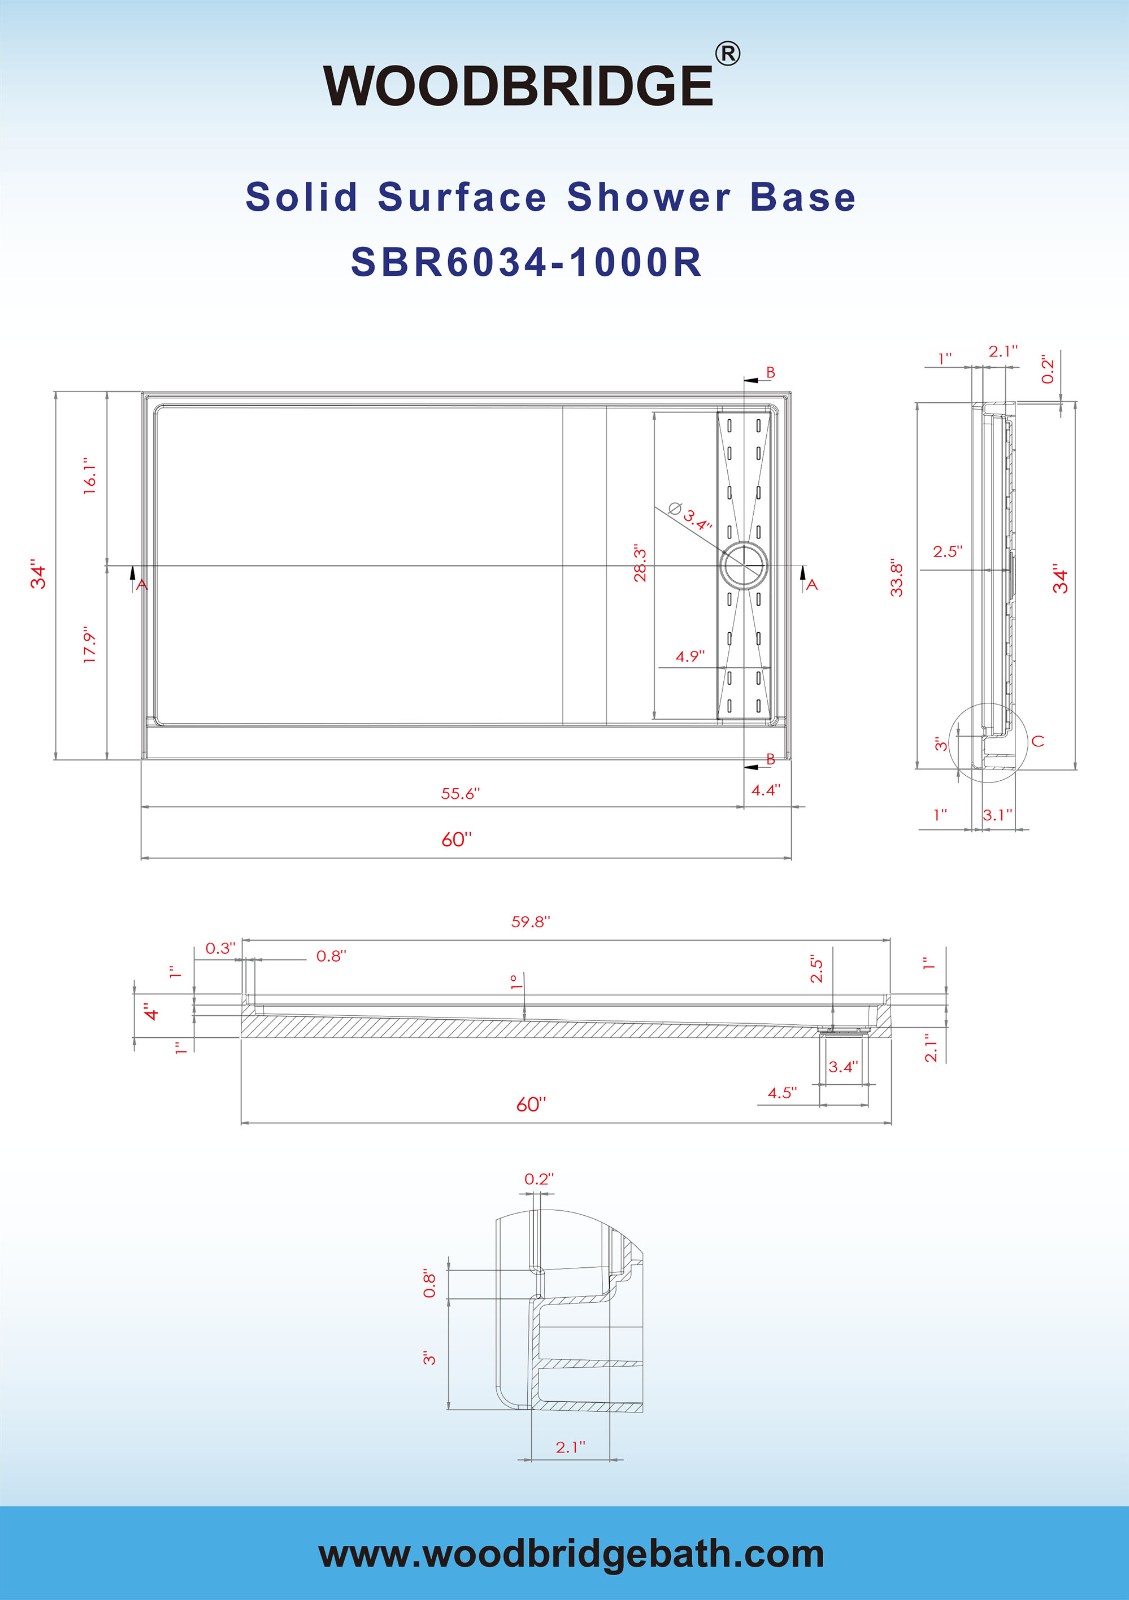  WOODBRIDGE SBR6034-1000R Solid Surface Shower Base with Recessed Trench Side Including Stainless Steel Linear Cover, 60